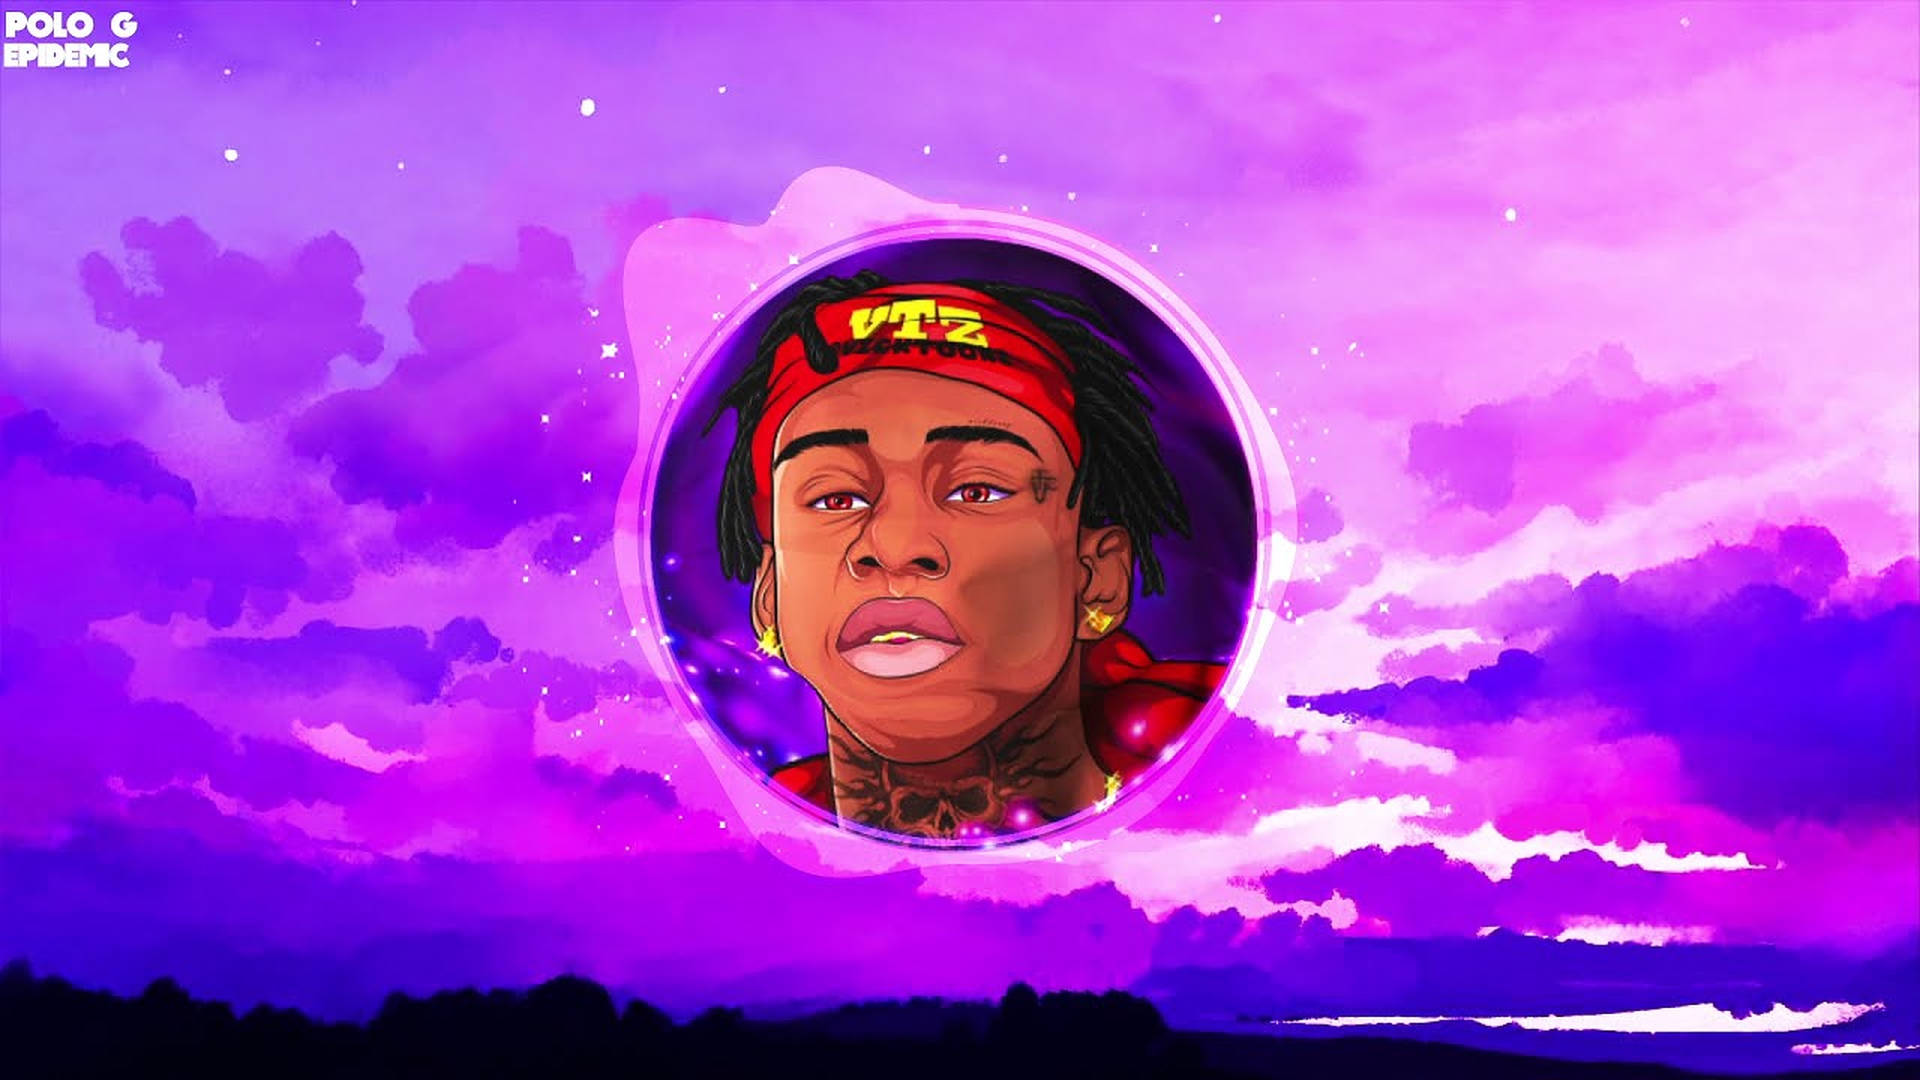 Polo G Pink Aesthetic Background